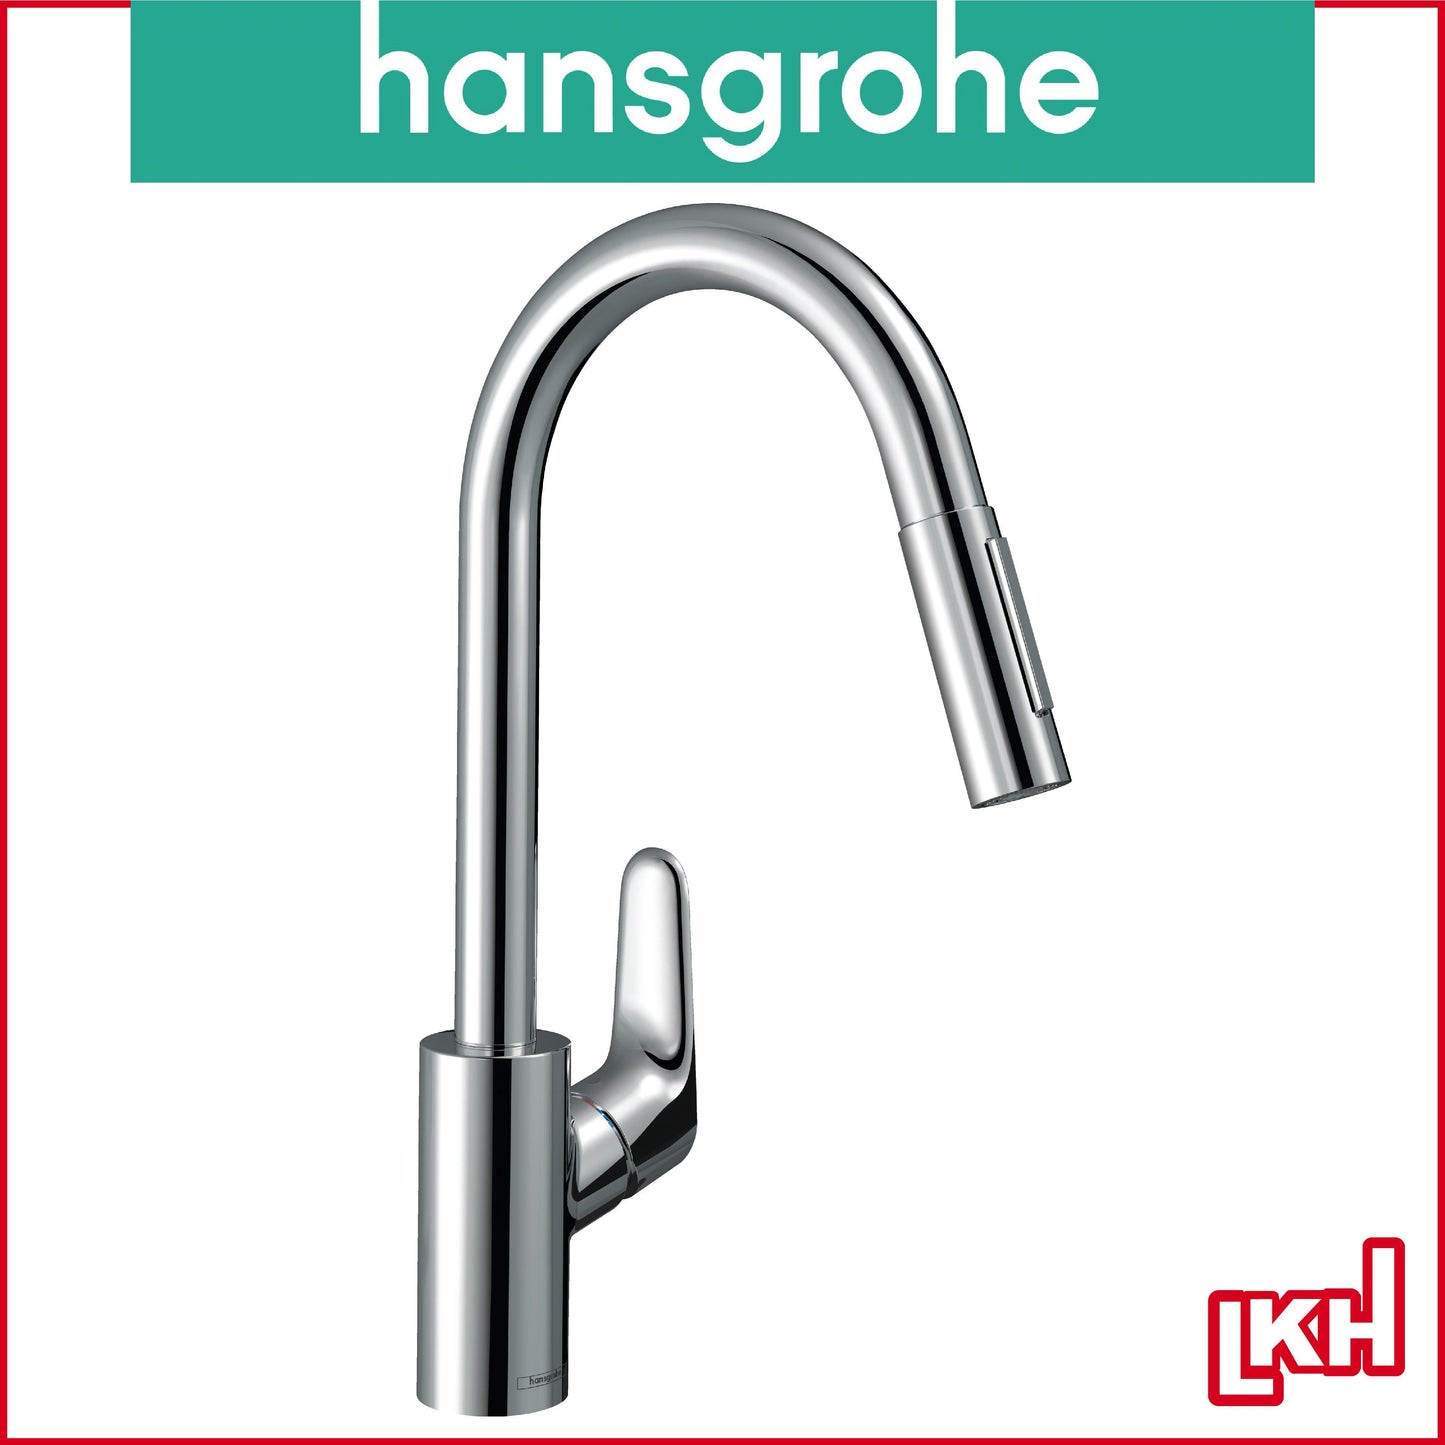 hansgrohe 73895000 pull out spray kitchen sink mixer